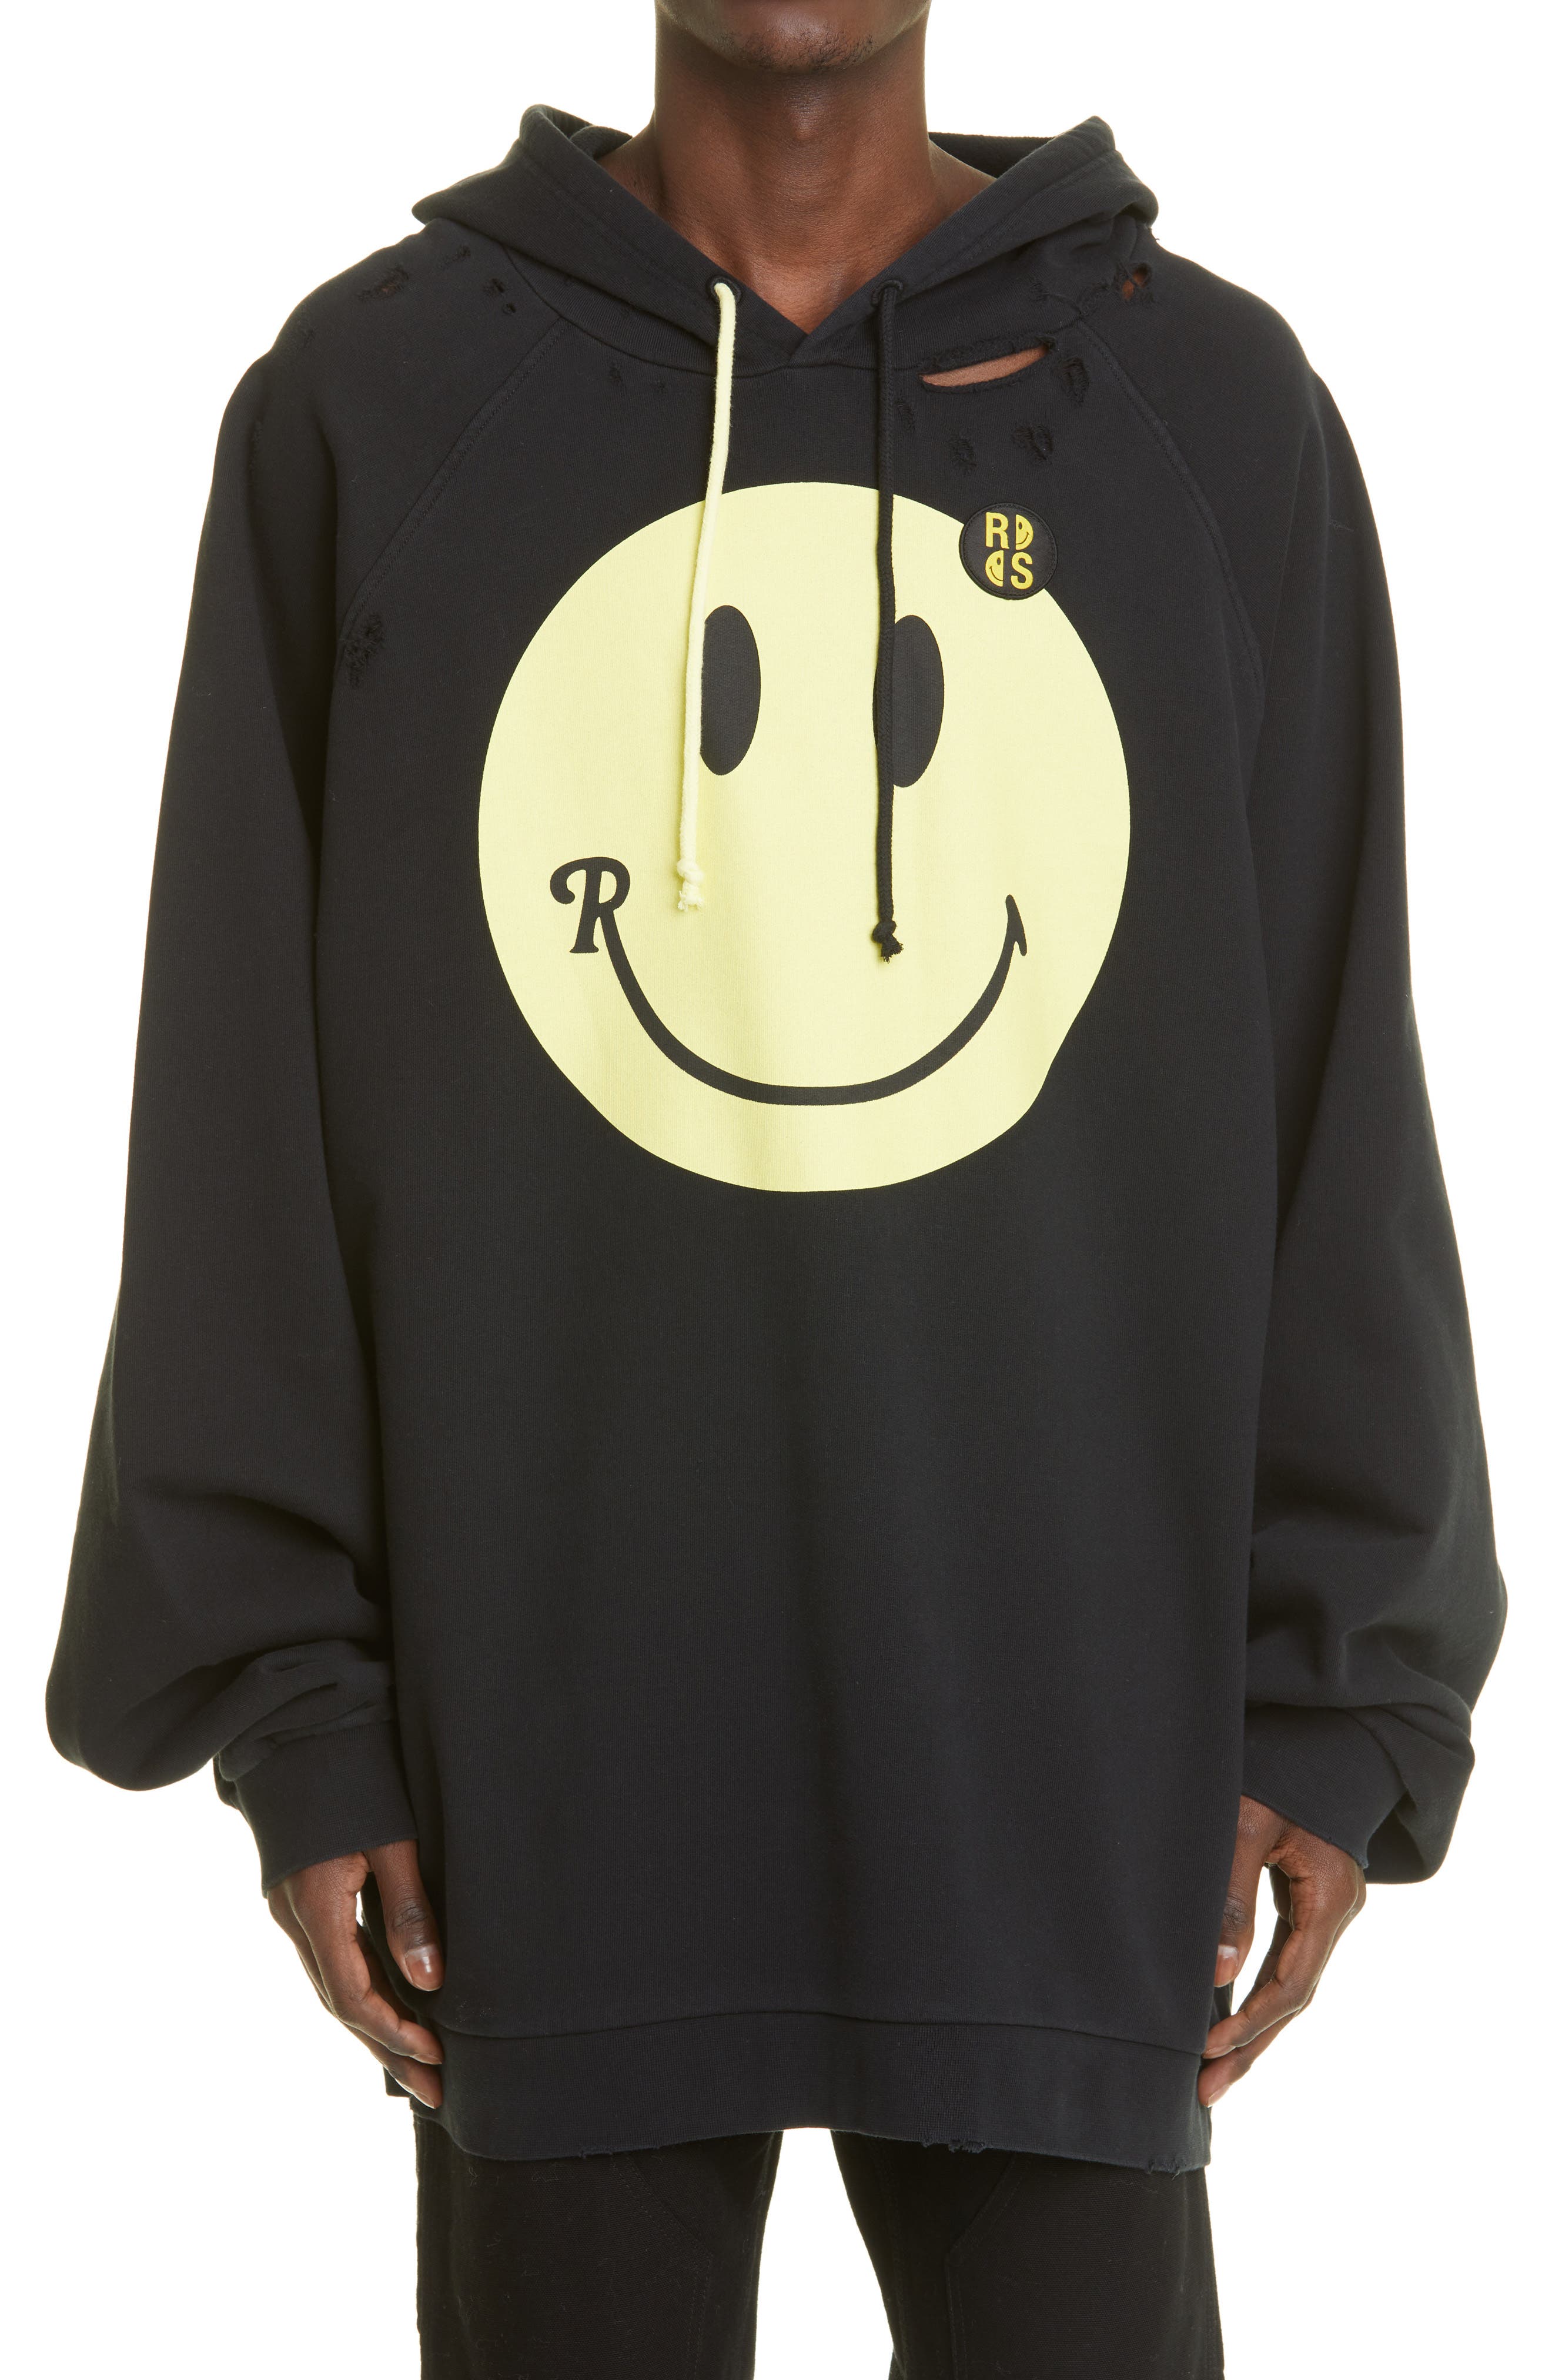 Raf Simons x Smiley 50th Anniversary Oversize Graphic Hoodie in Black at Nordstrom, Size Small